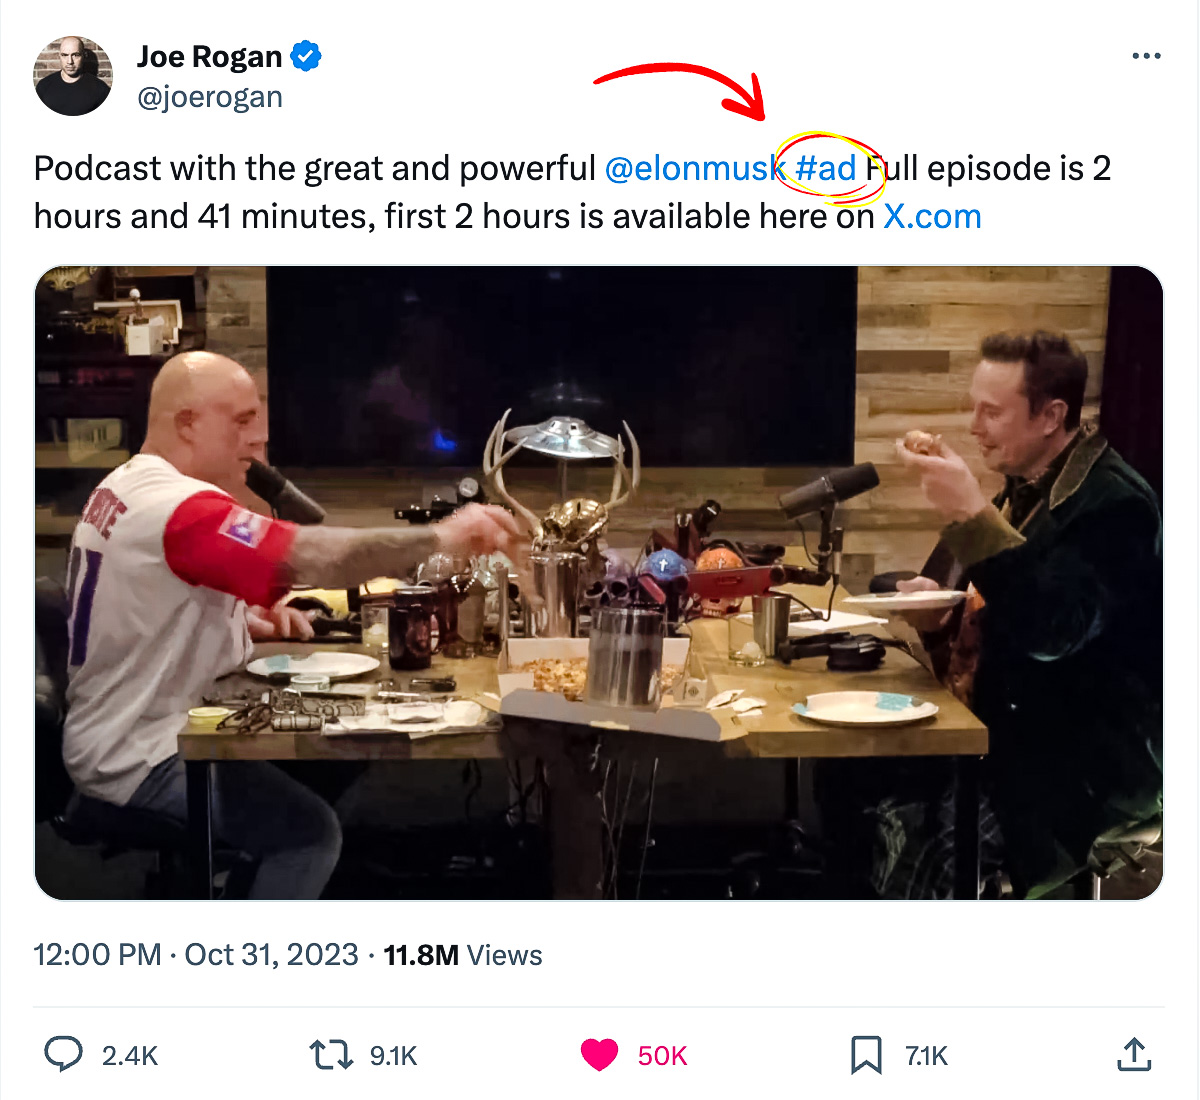 Joe Rogan & Elon Musk just MESSED UP BIG! I can’t believe nobody else noticed this! 🤯 This new JRE podcast is WILD! If you missed it: • Rogan shoots an arrow into Elon Musk’s CyberTruck • Musk convinces Joe to eat pineapple/anchovy pizza • Elon admits Twitter used to